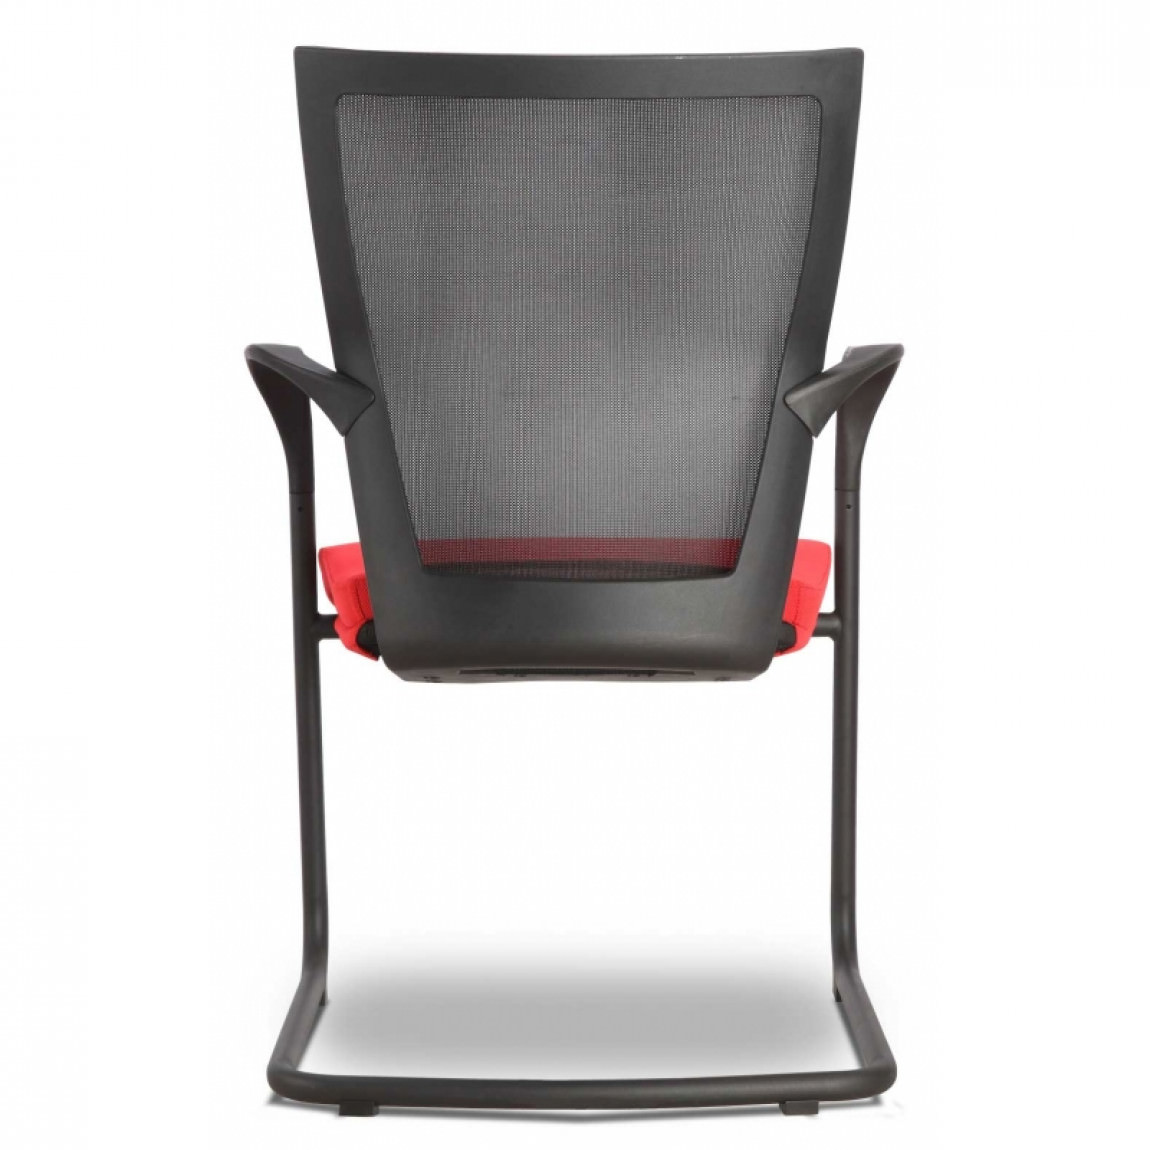 Stacking Guest Chair with Red Seat Cover